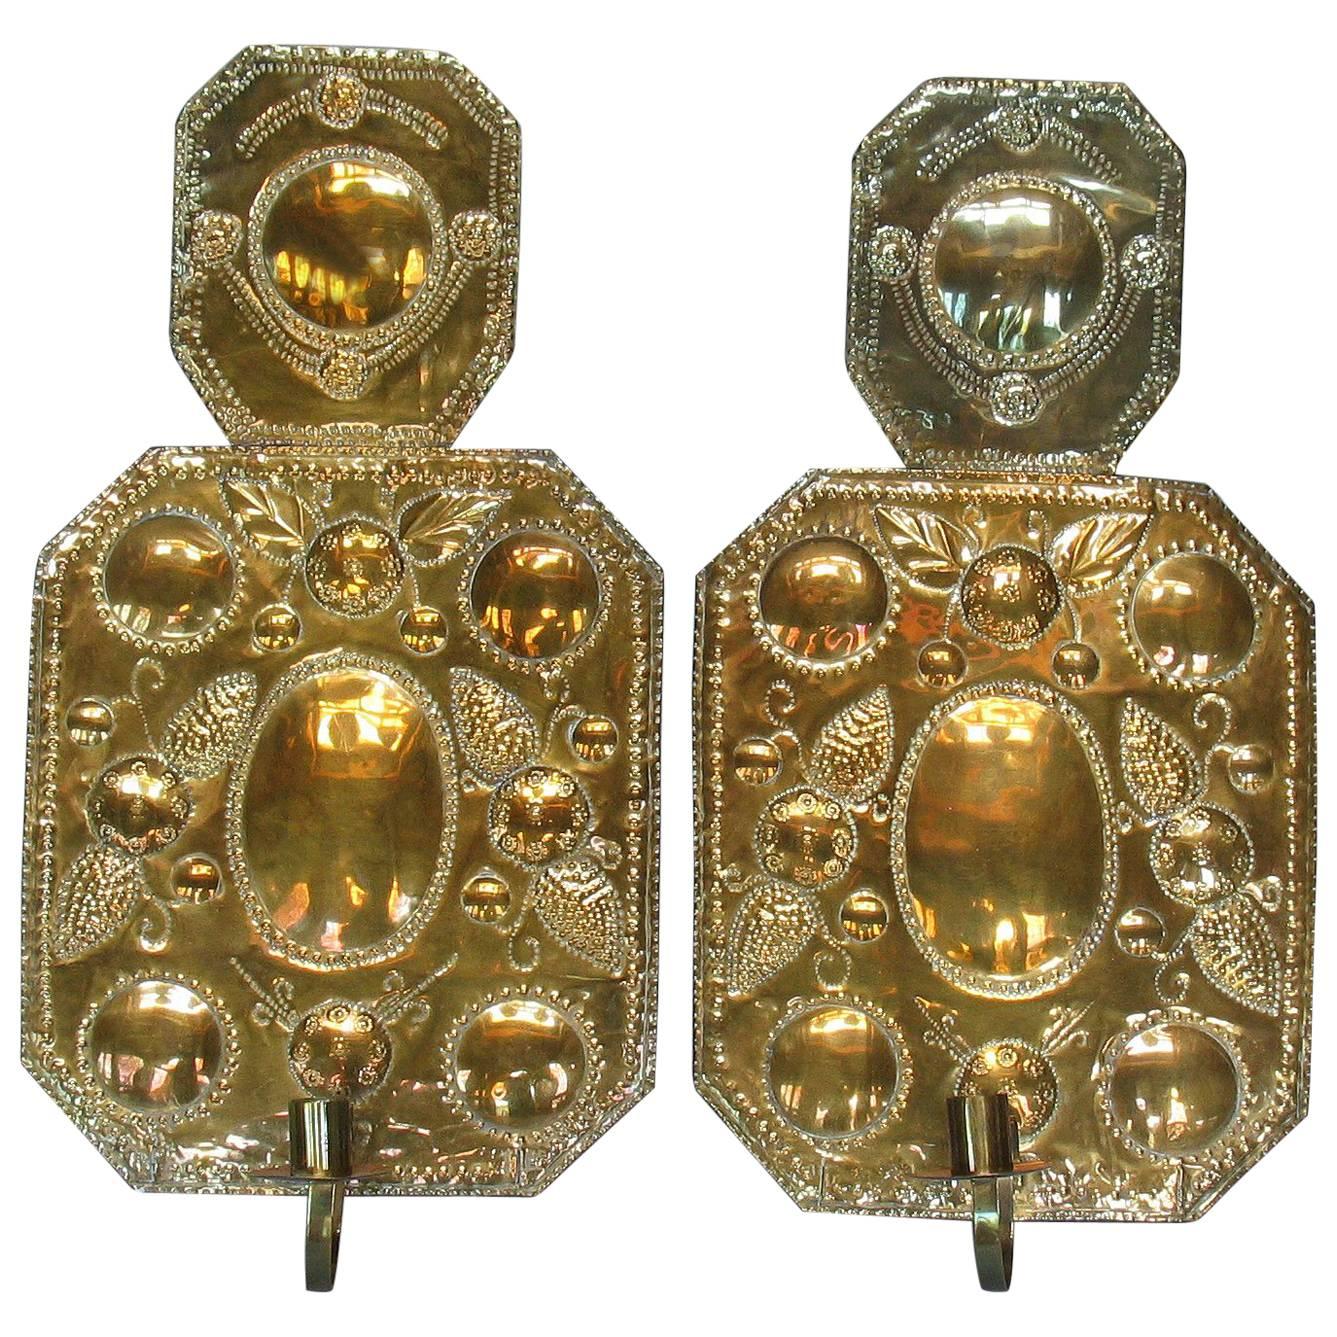 Pair of Swedish Arts & Crafts Brass Repoussé One Light Wall Candle Sconces